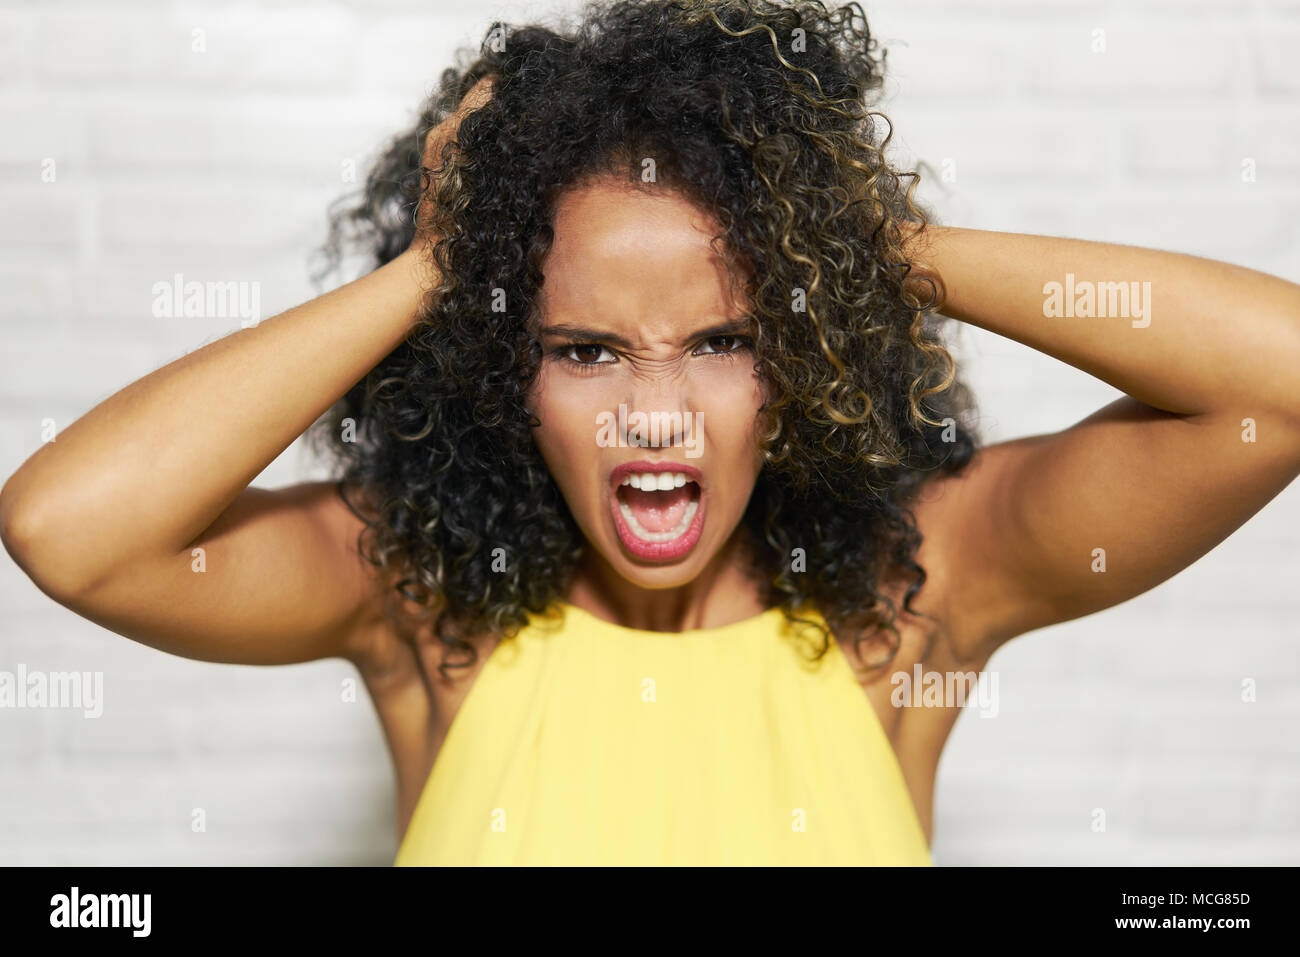 Facial Expressions Of Young Black Woman On Brick Wall Stock Photo